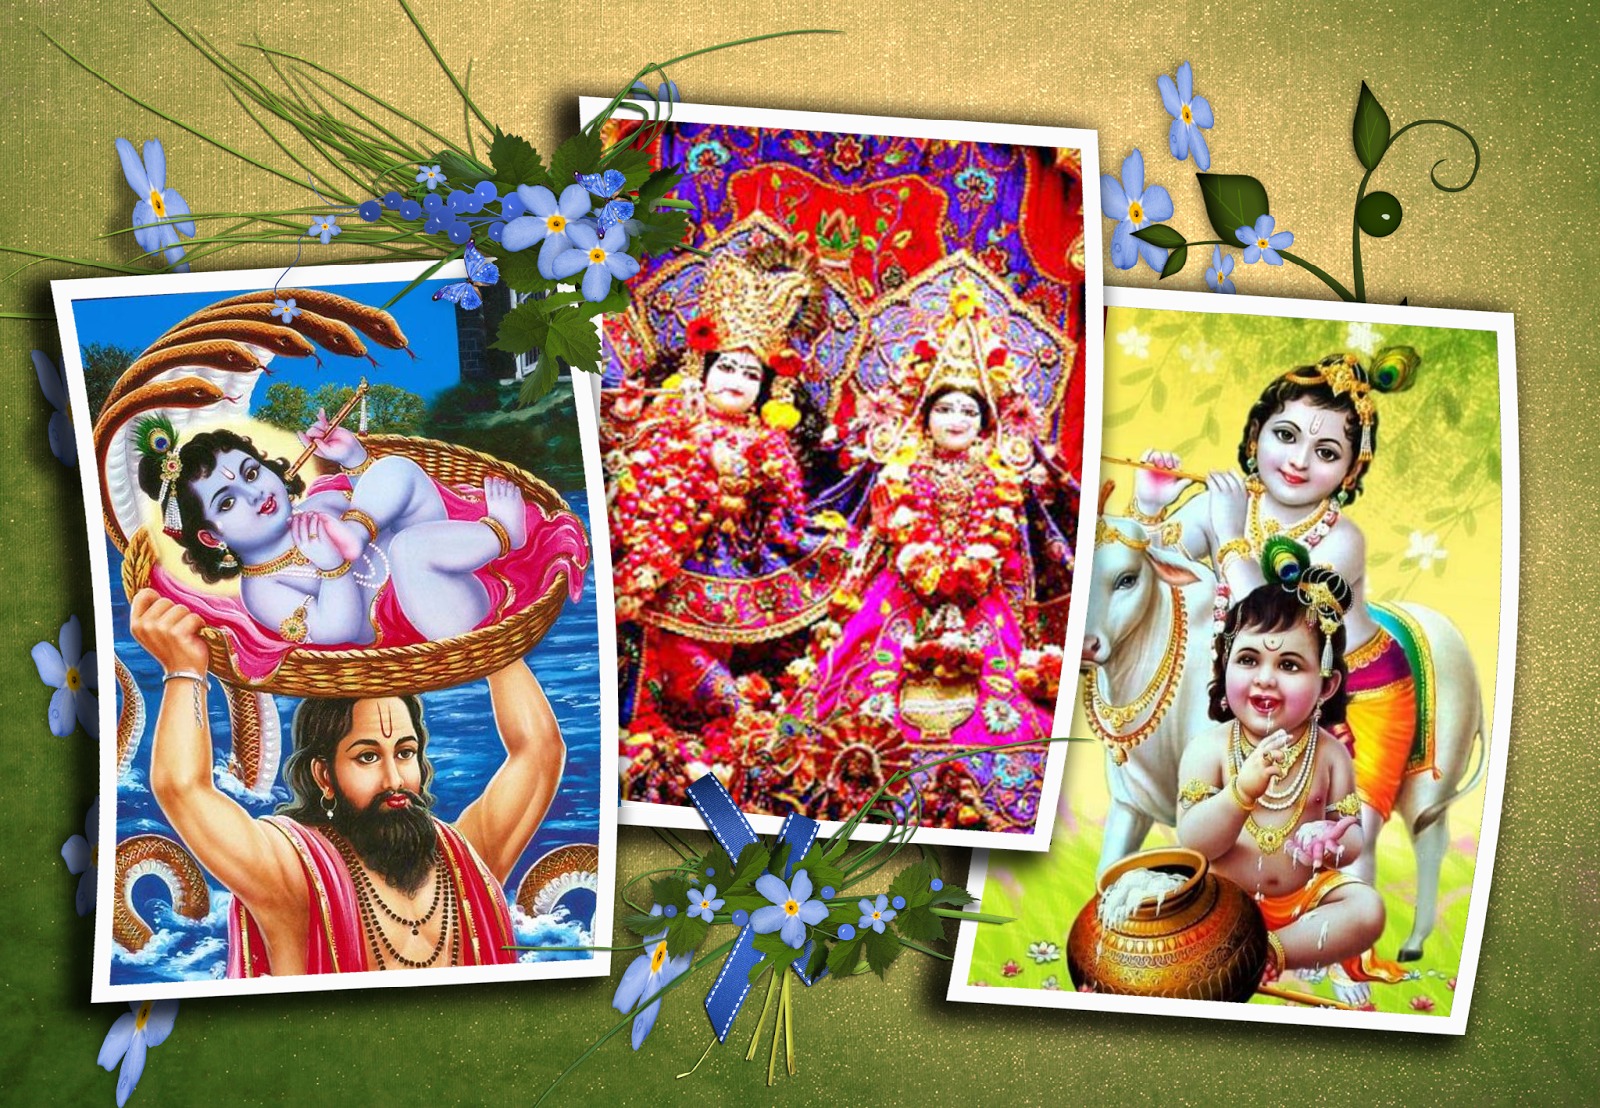 You are currently viewing “Krishna Janamashtami- A festival of Gaiety, Merriment & Celebrations”